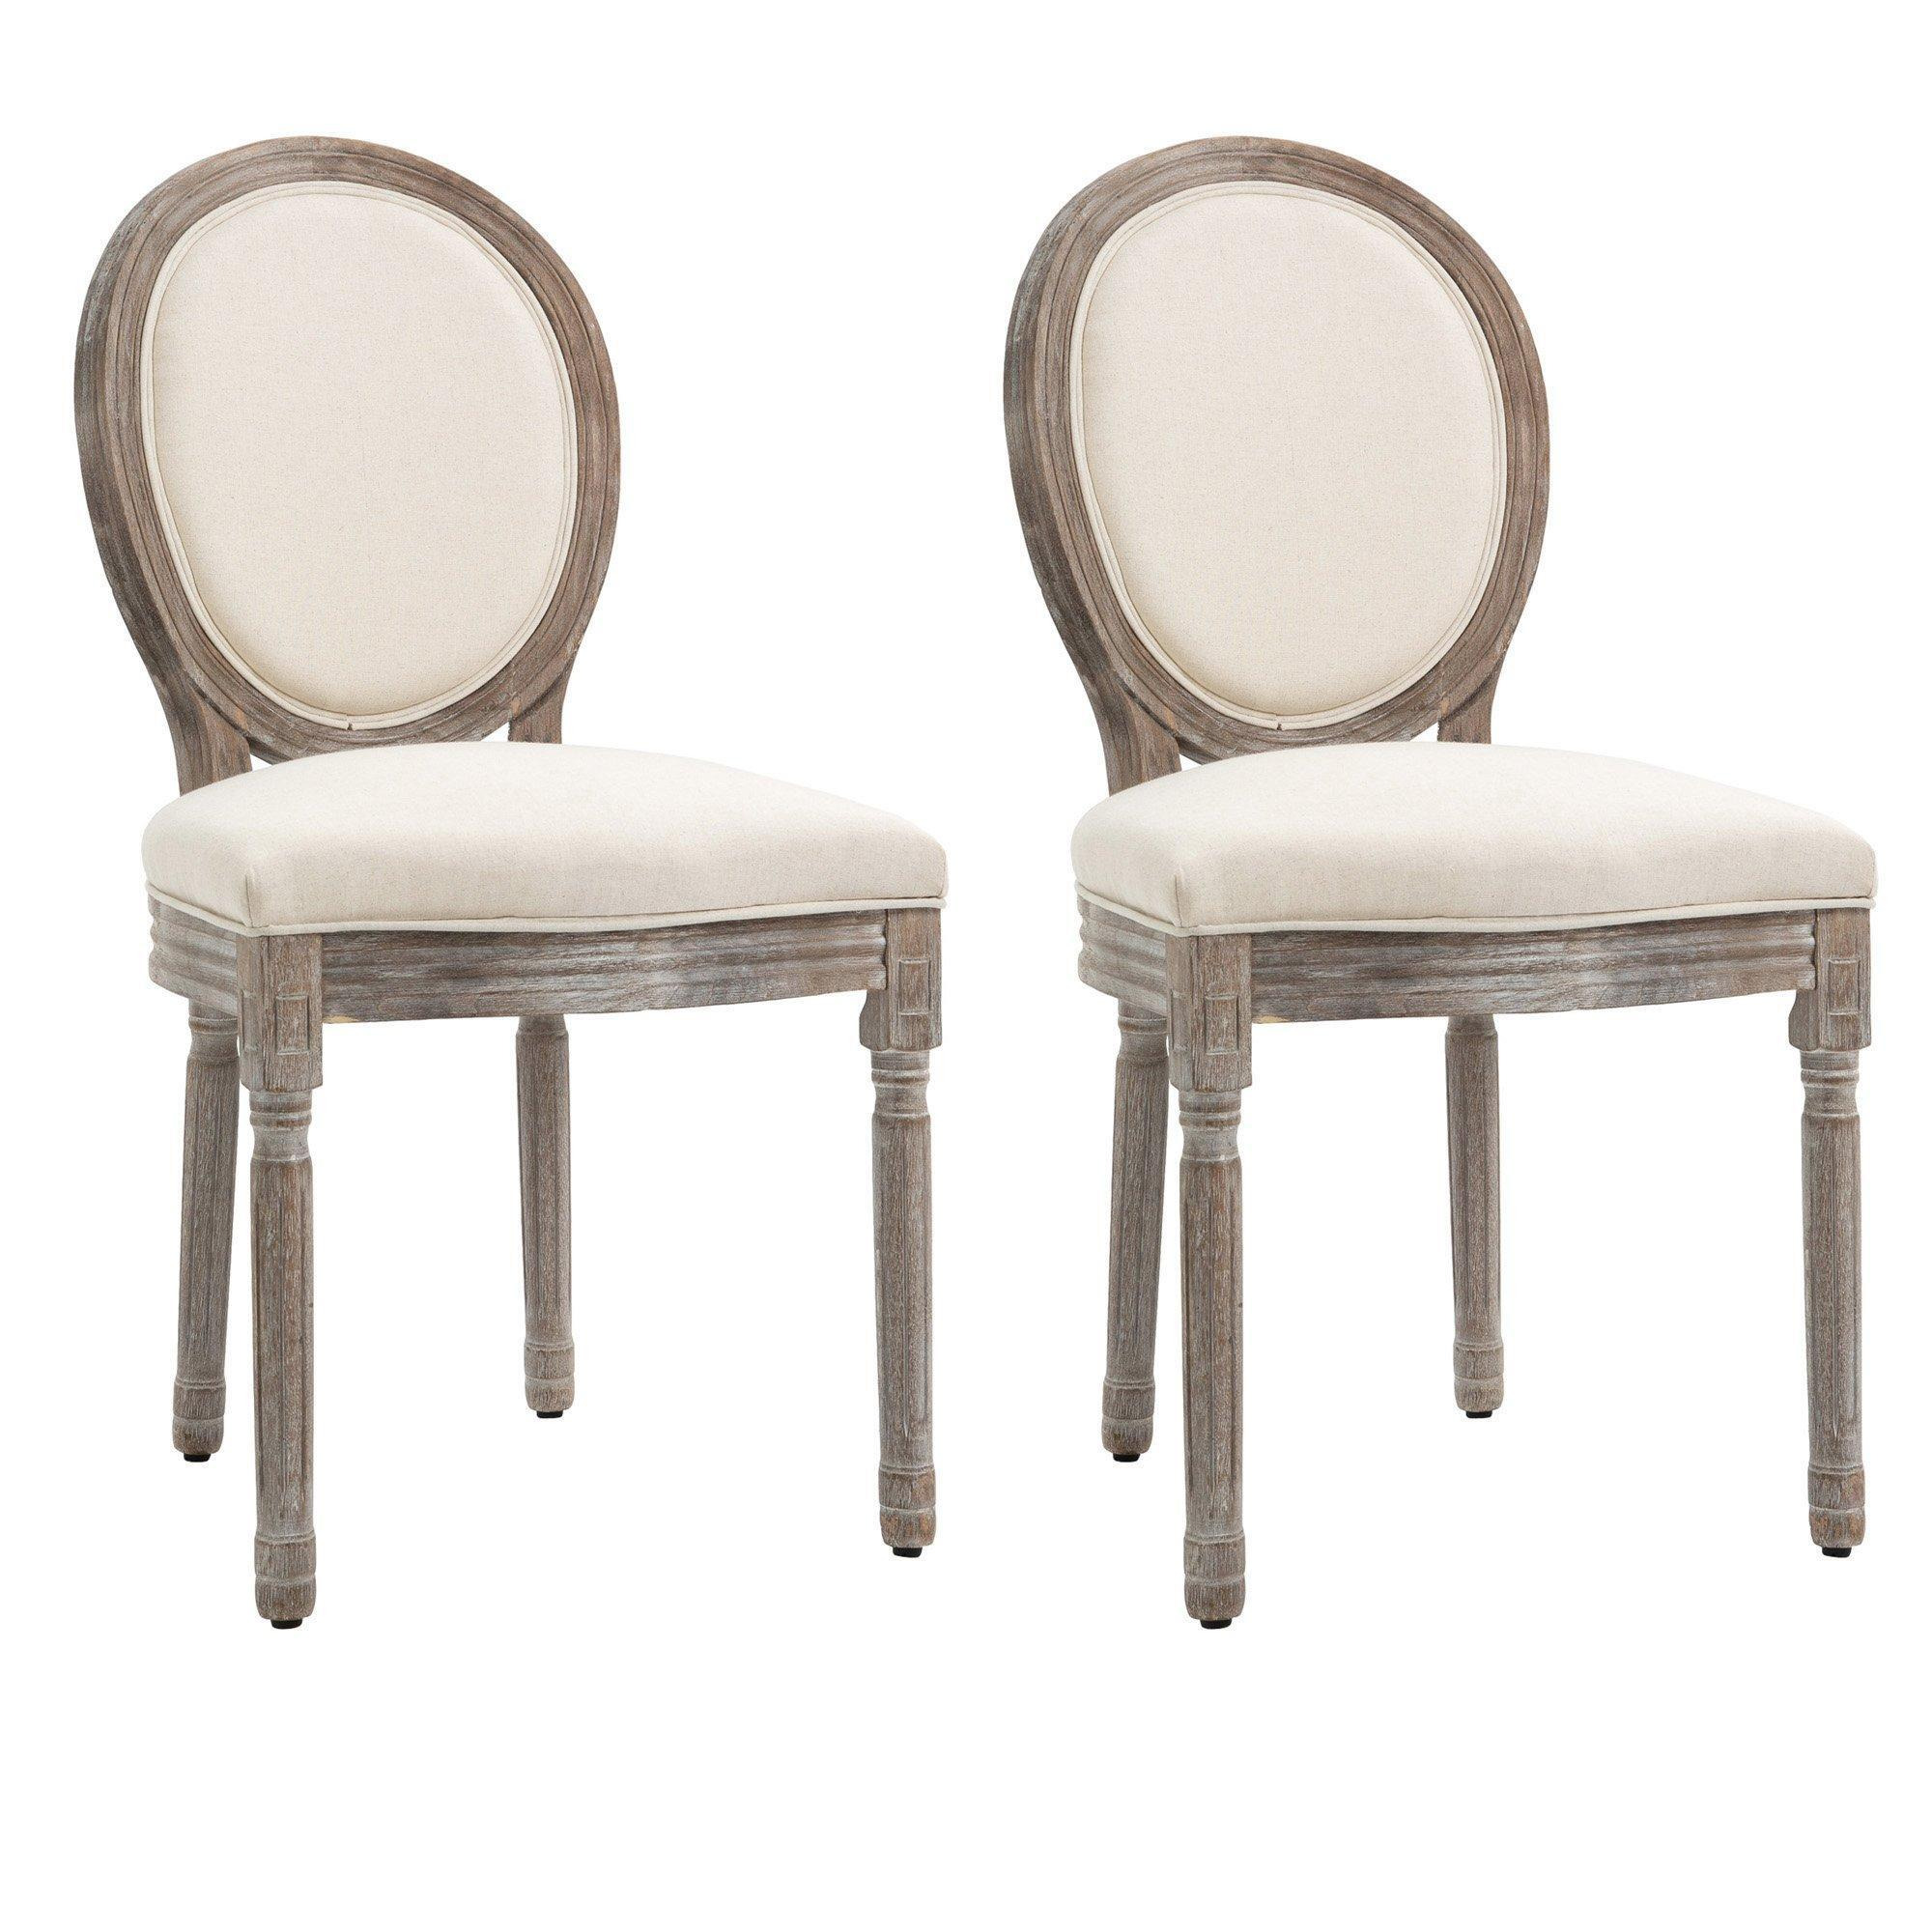 Elegant French Style Dining Chair Set with Wood Frame Foam Seats Cream - image 1